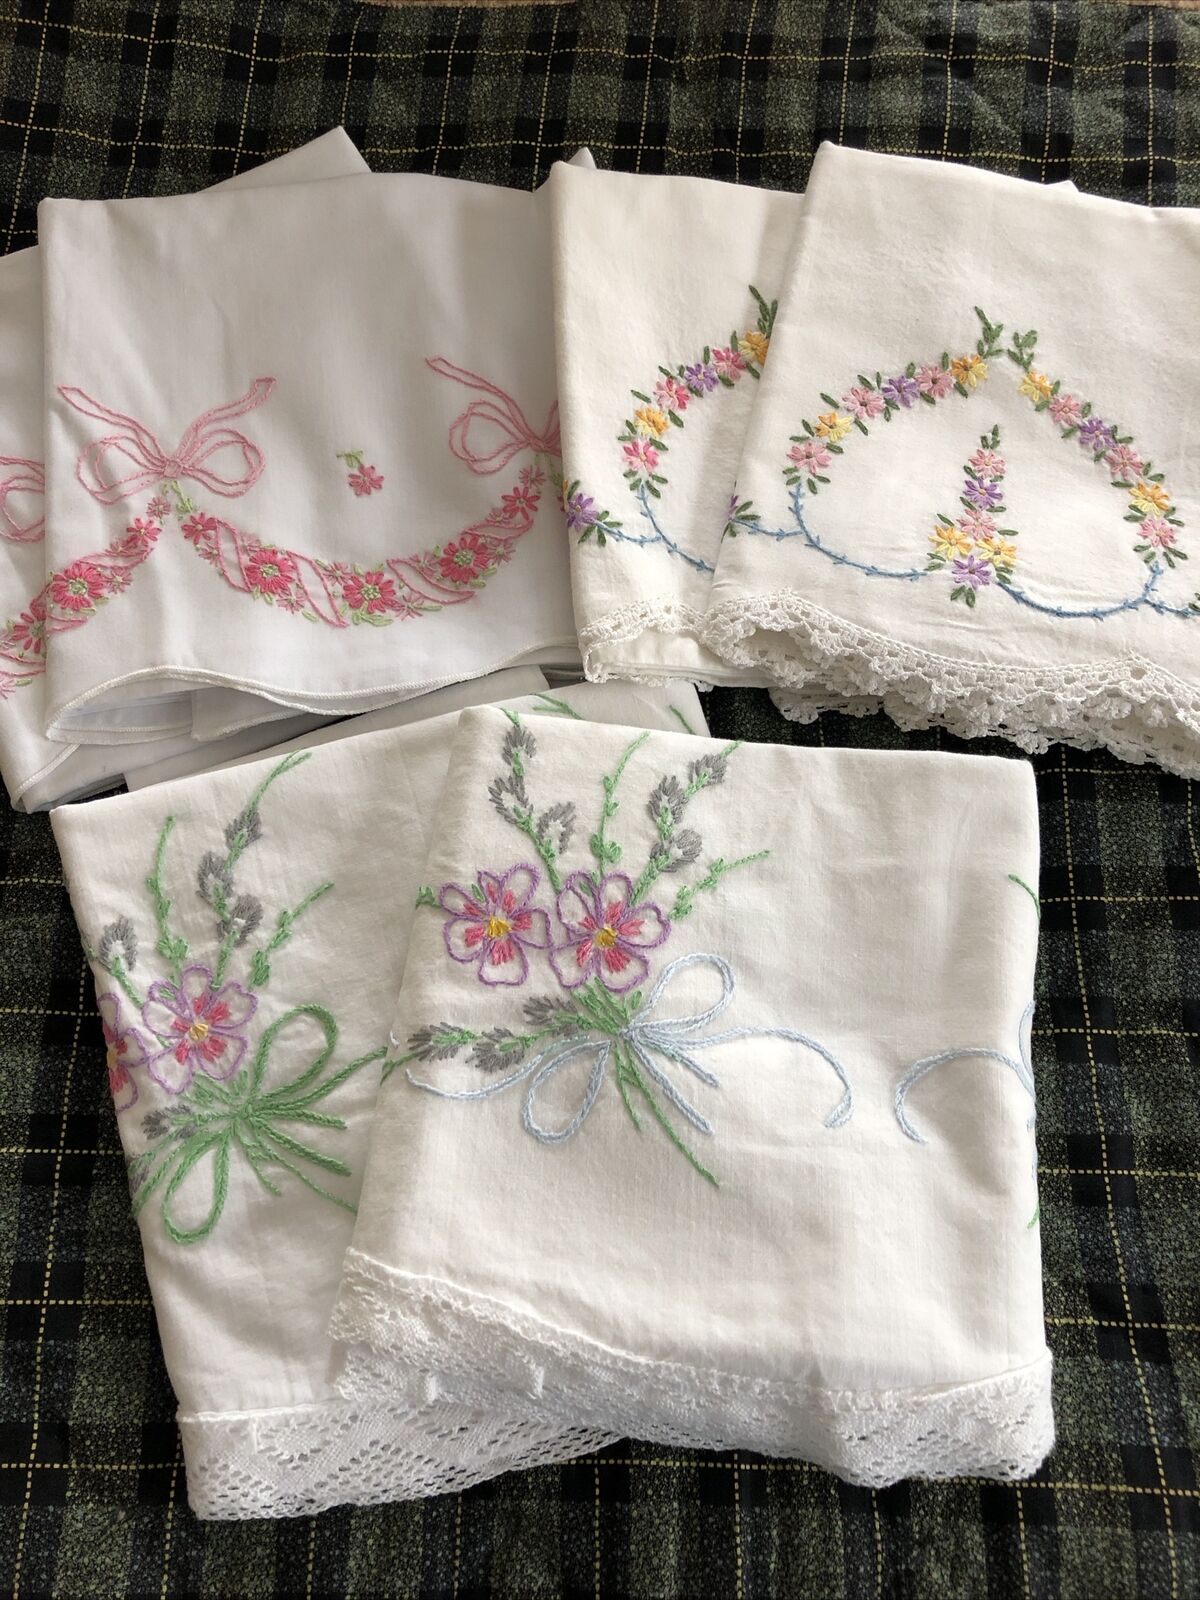 Lot of 3 Pair Vintage Embroidered Crochet Standard Pillowcase Sets